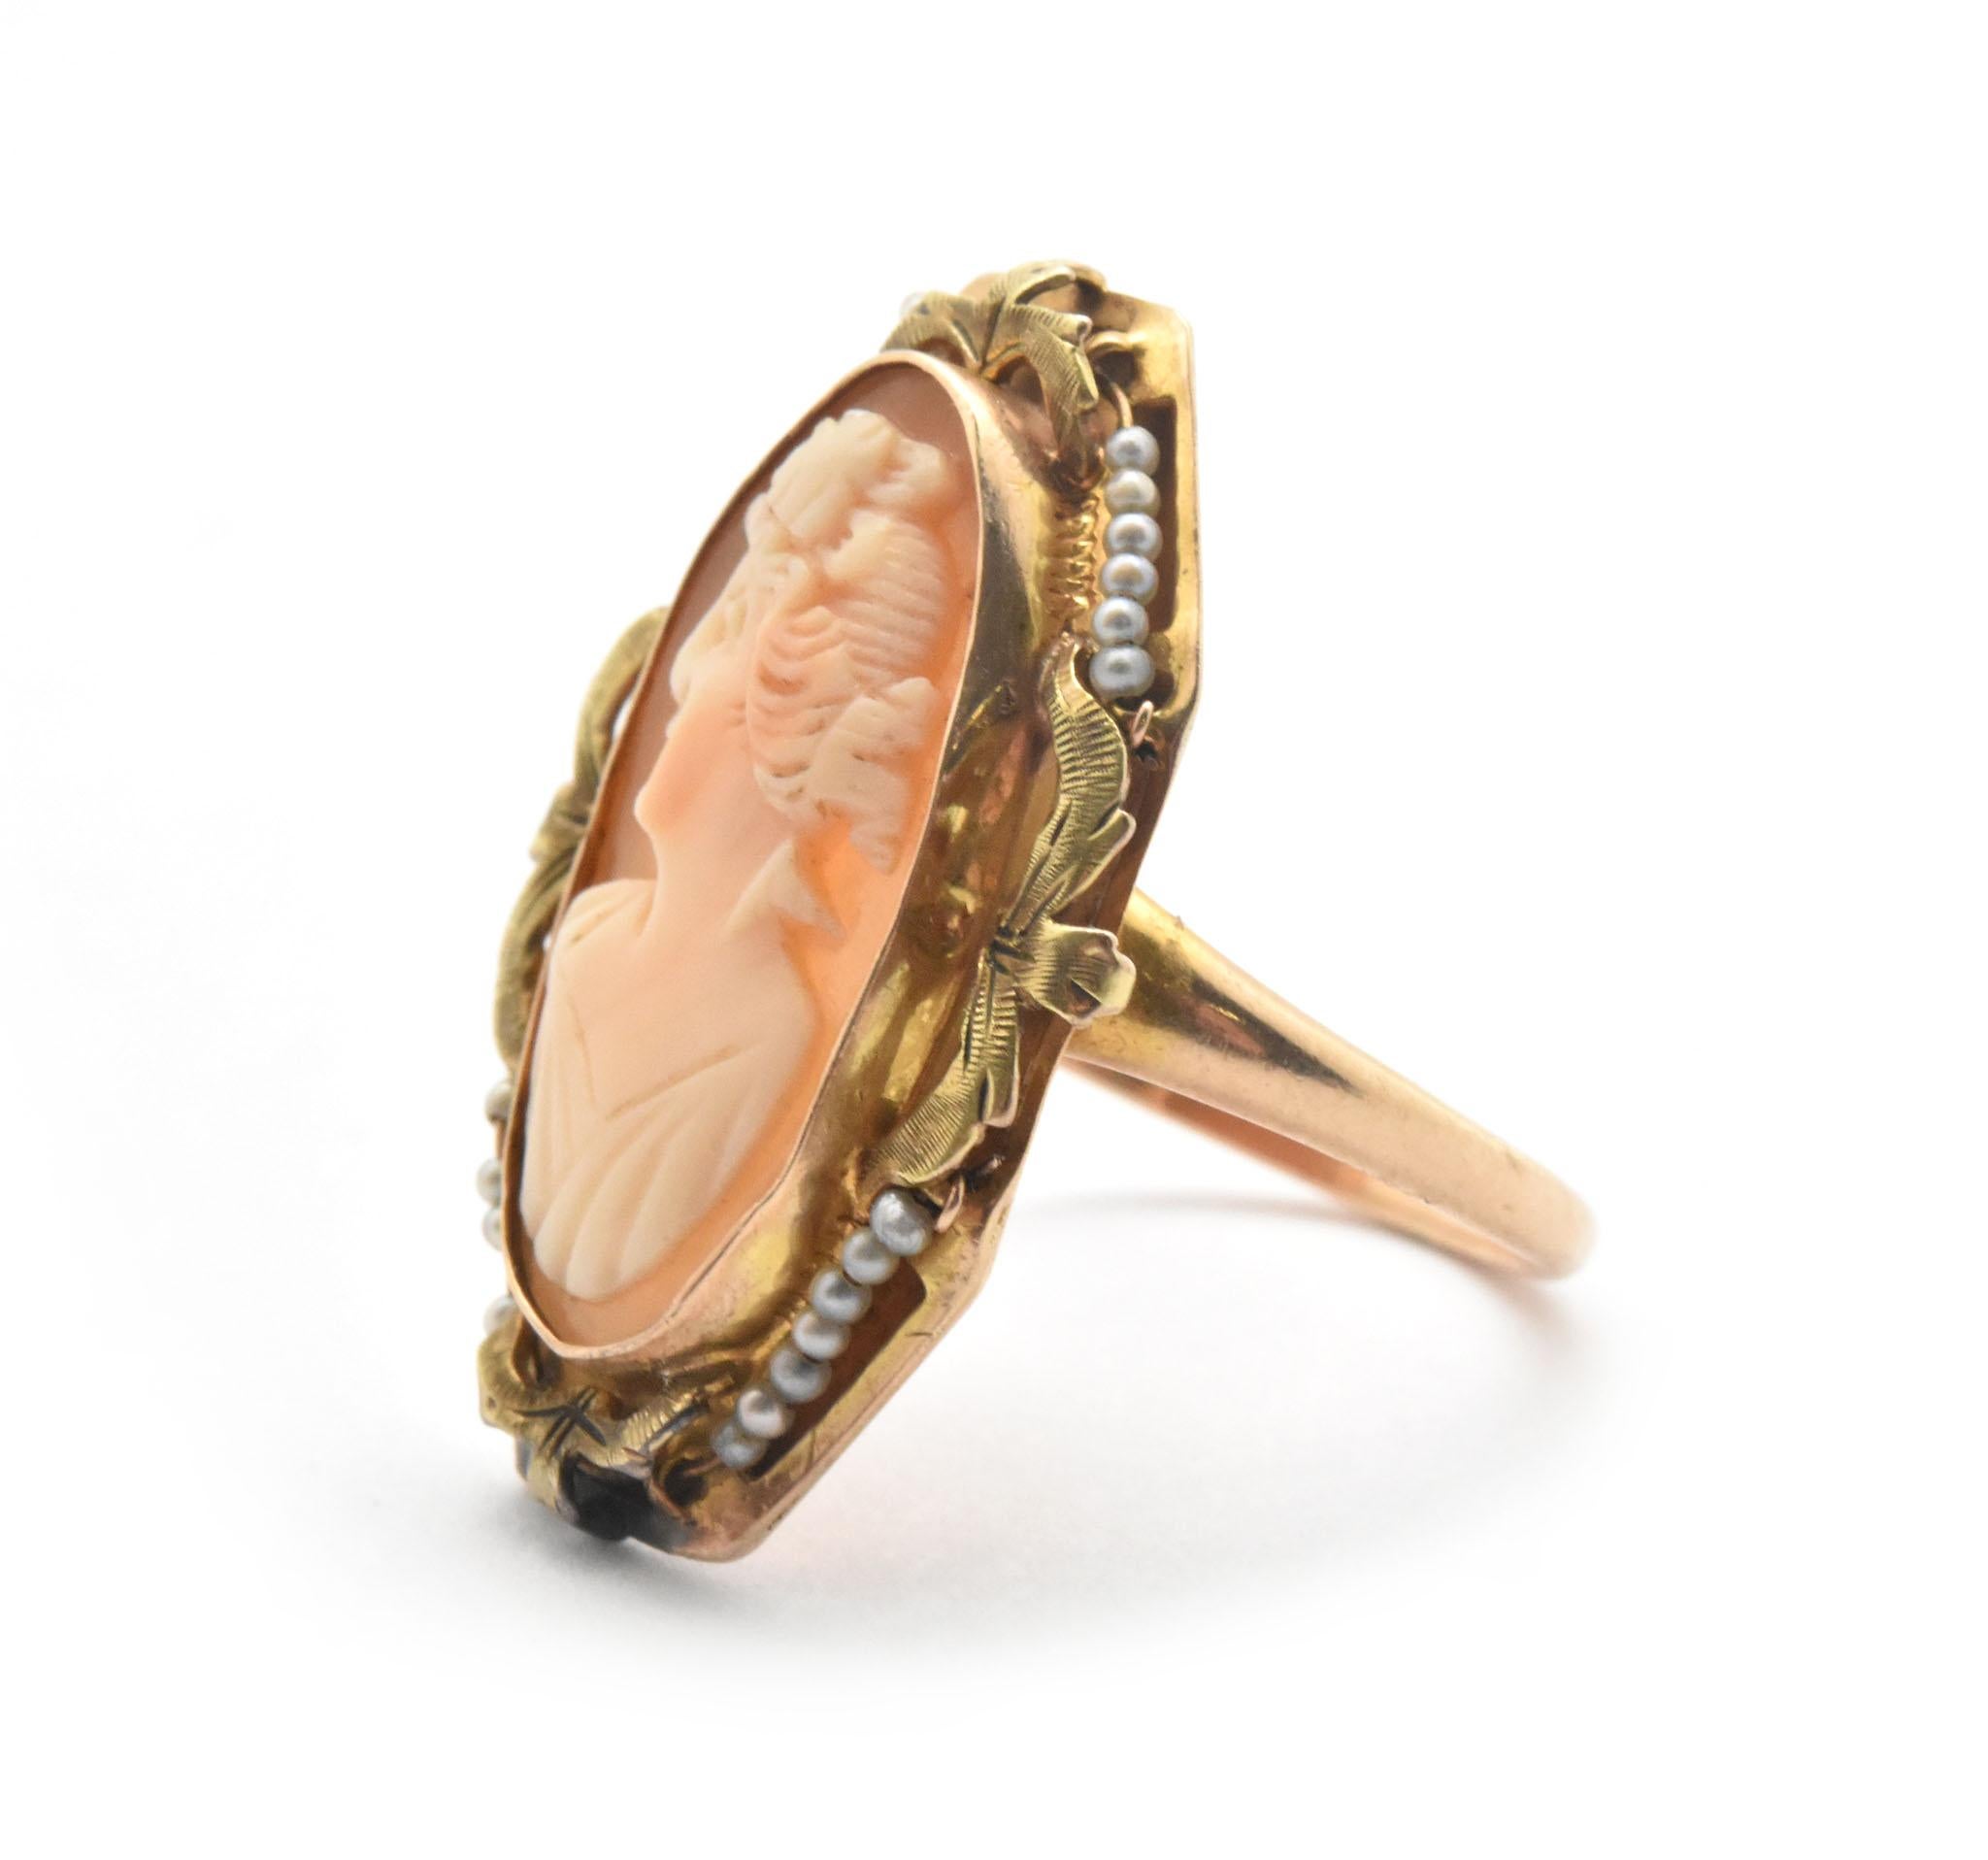 10k gold cameo ring